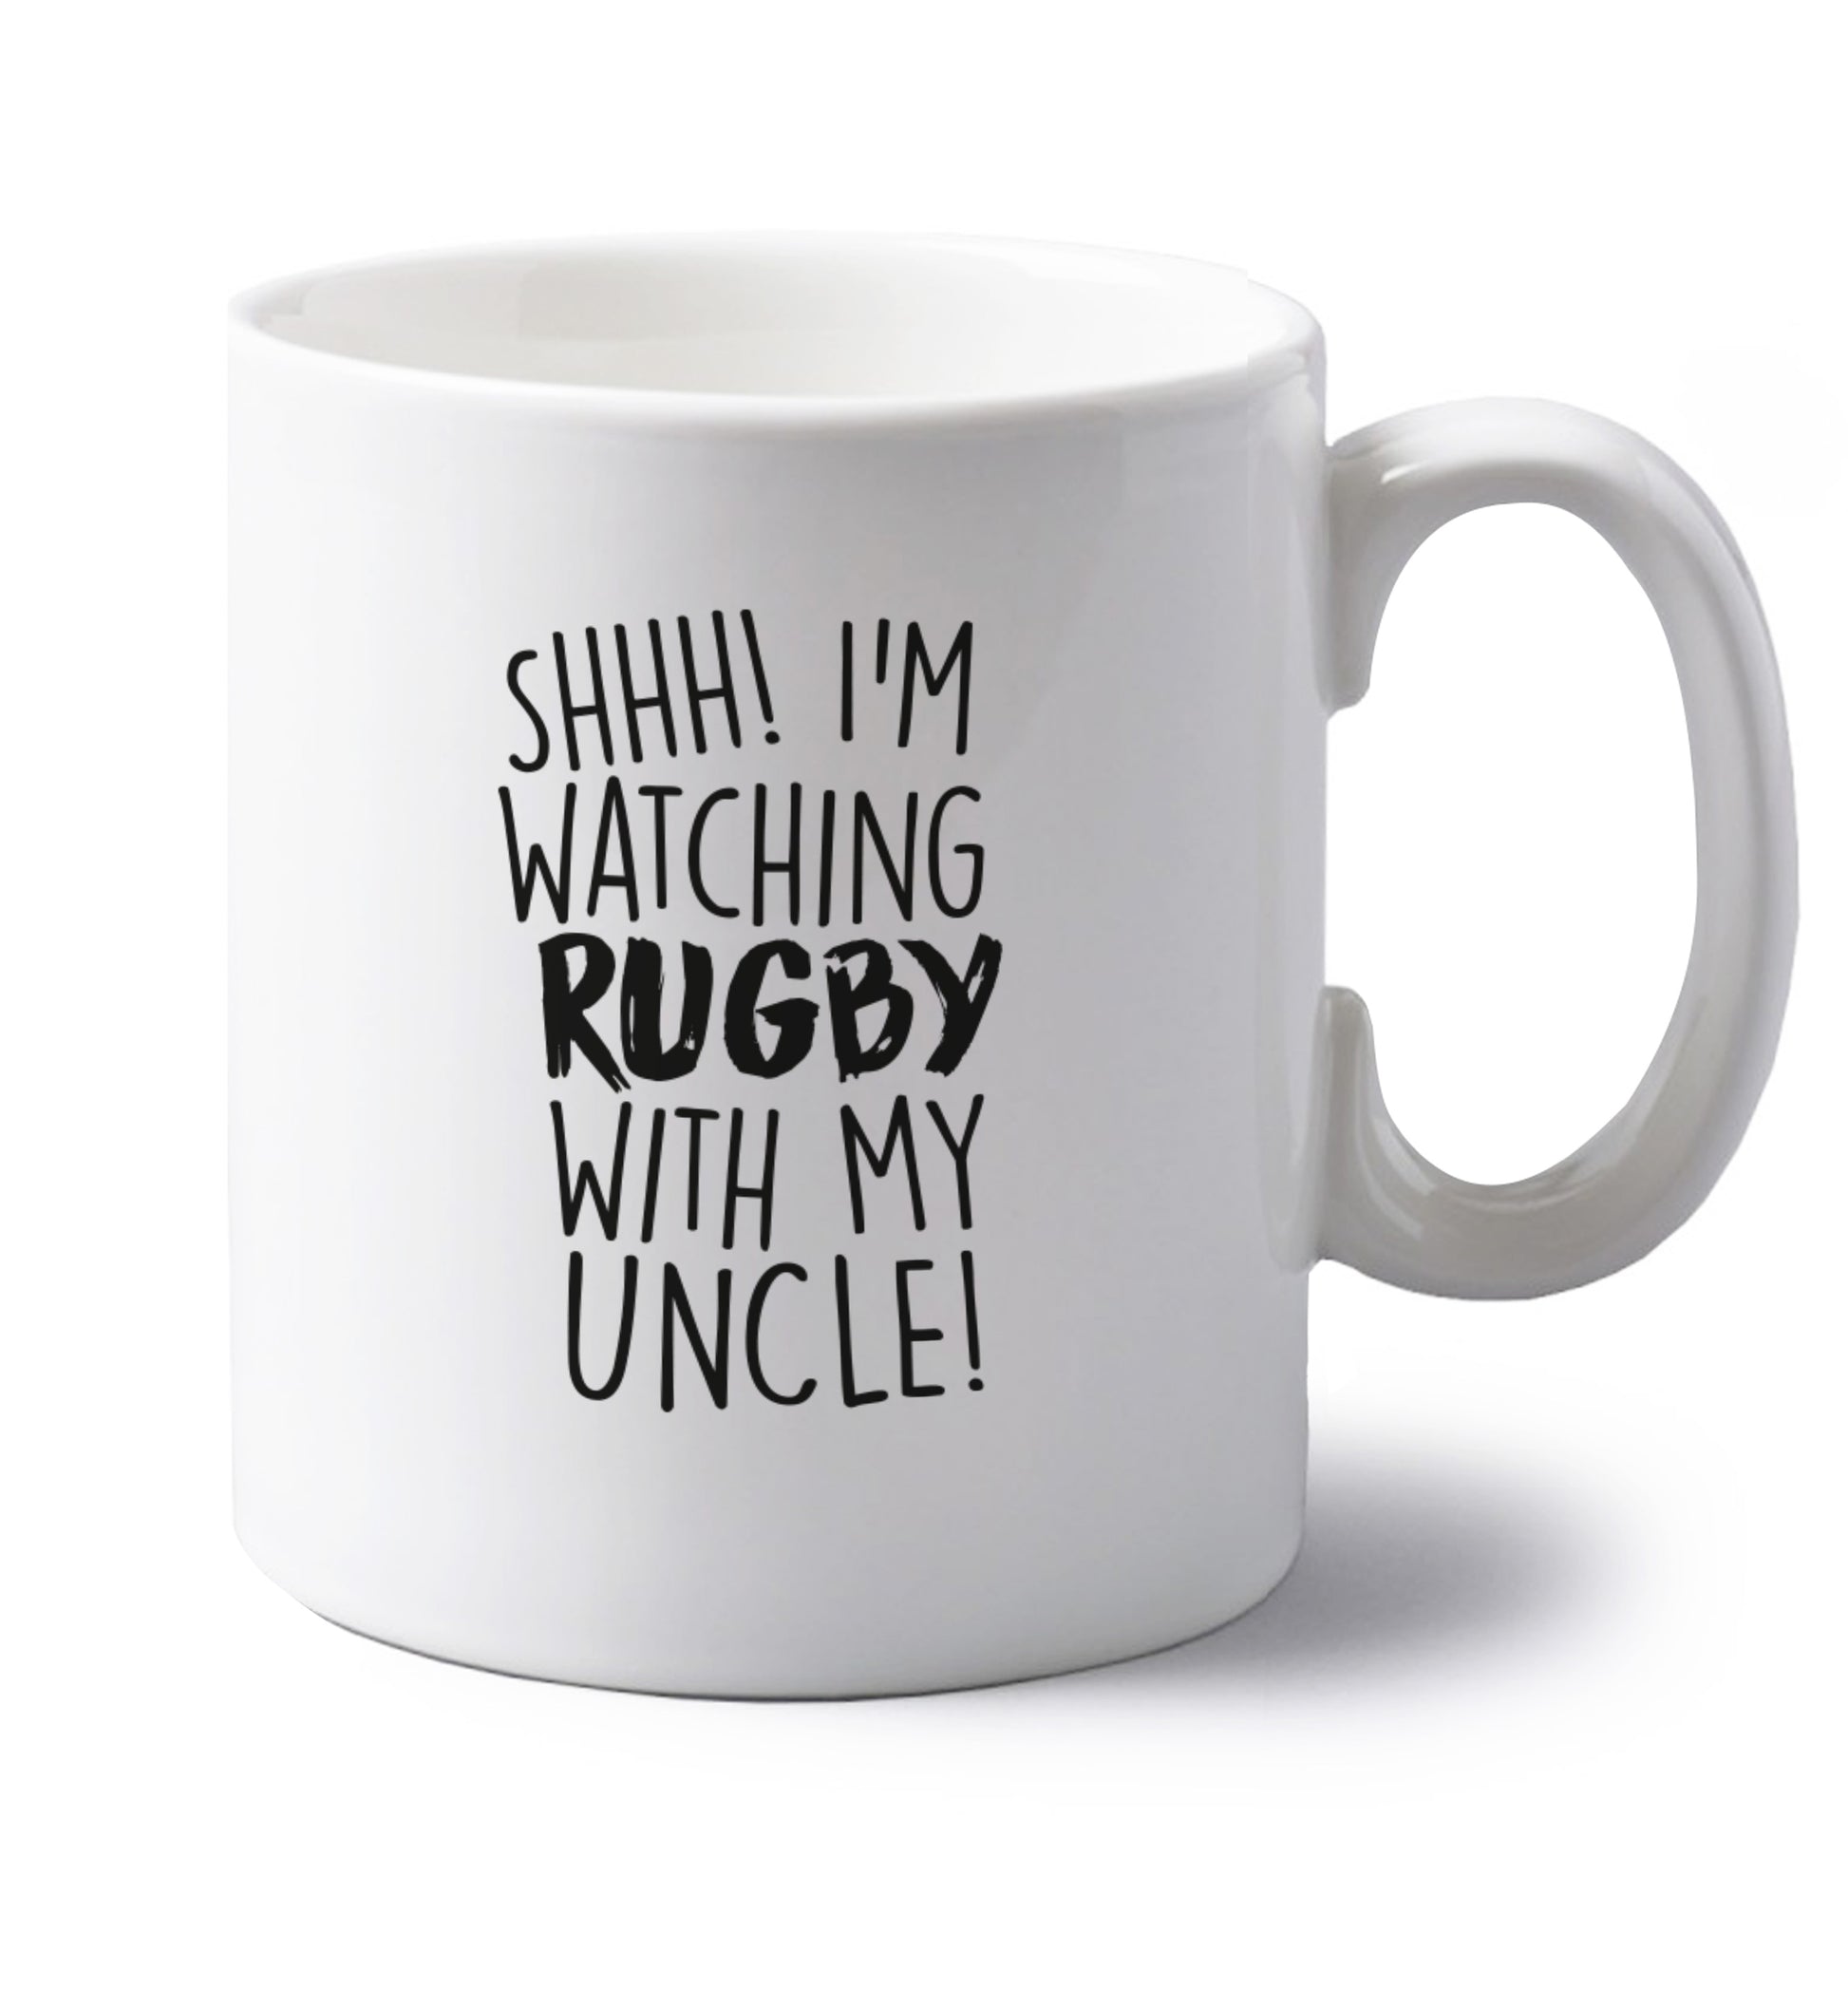 Shh.. I'm watching rugby with my uncle left handed white ceramic mug 